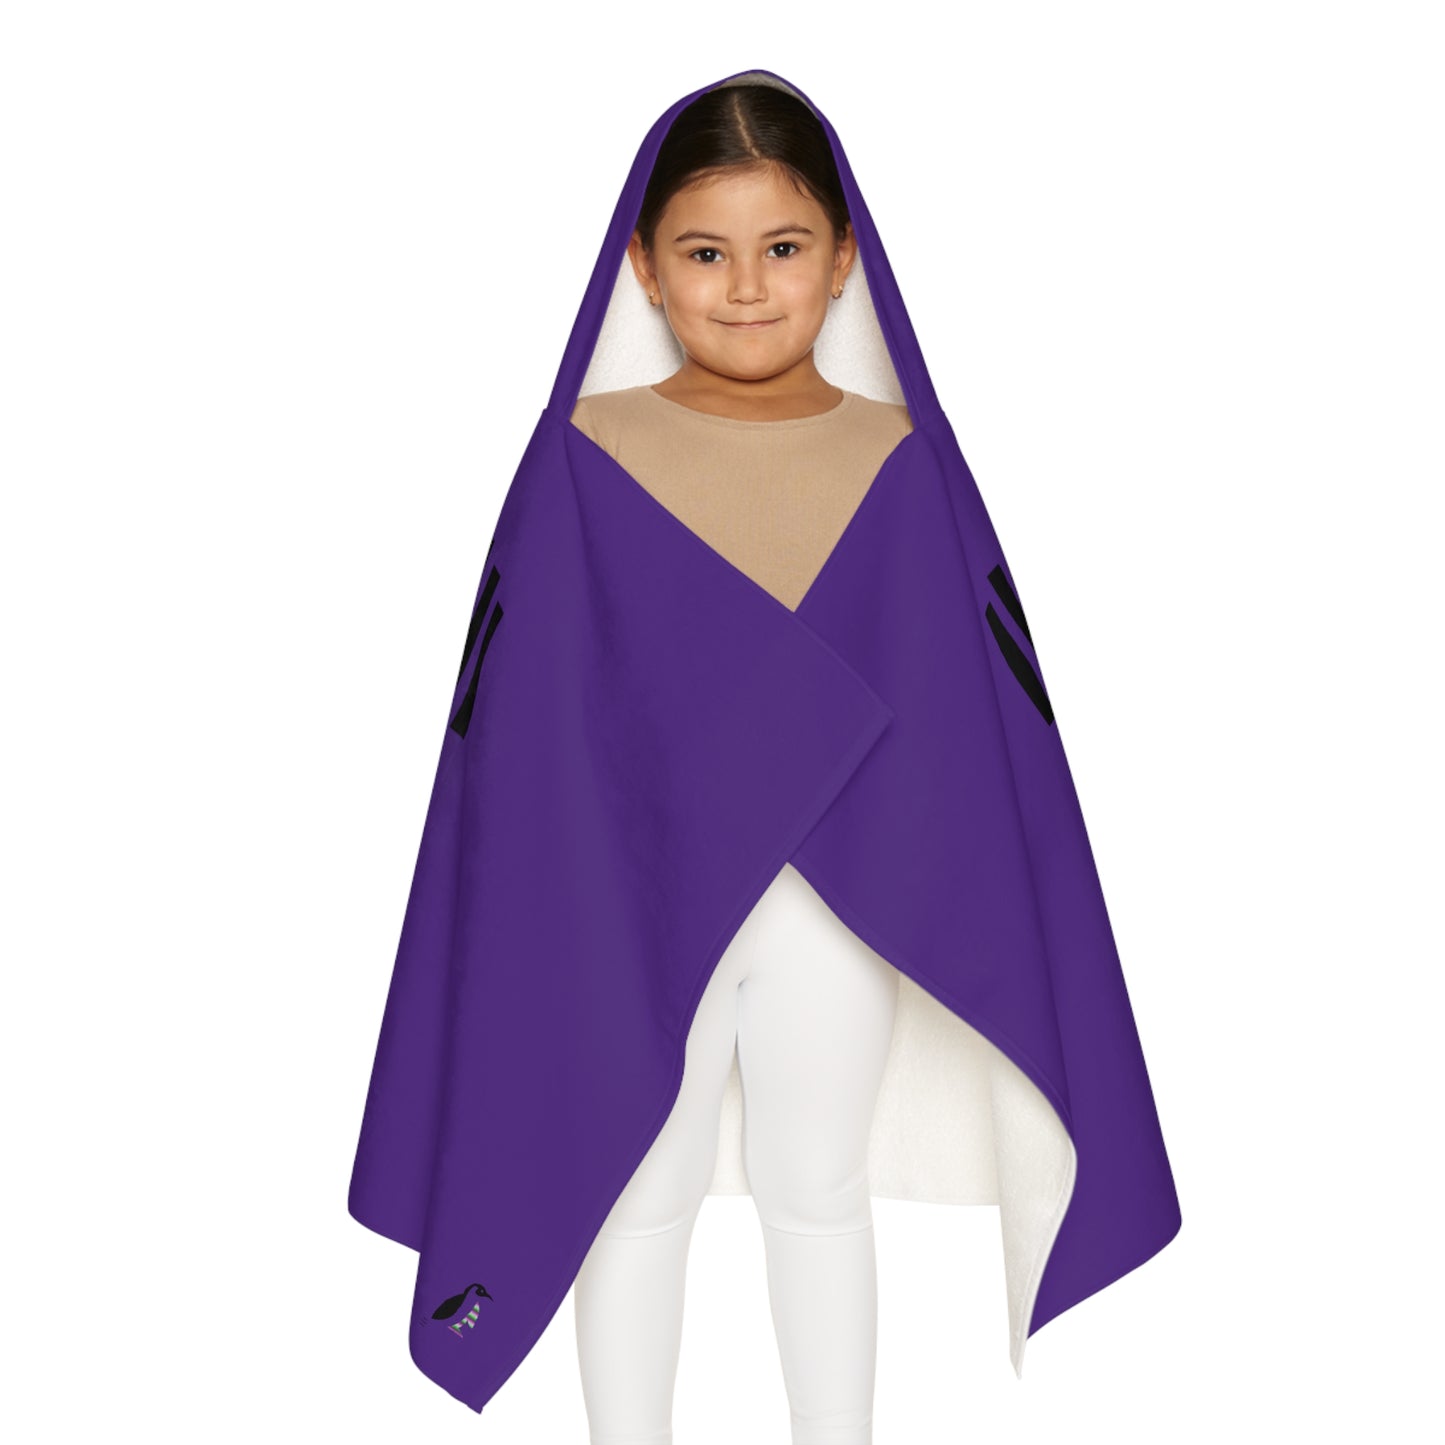 Youth Hooded Towel: Weightlifting Purple